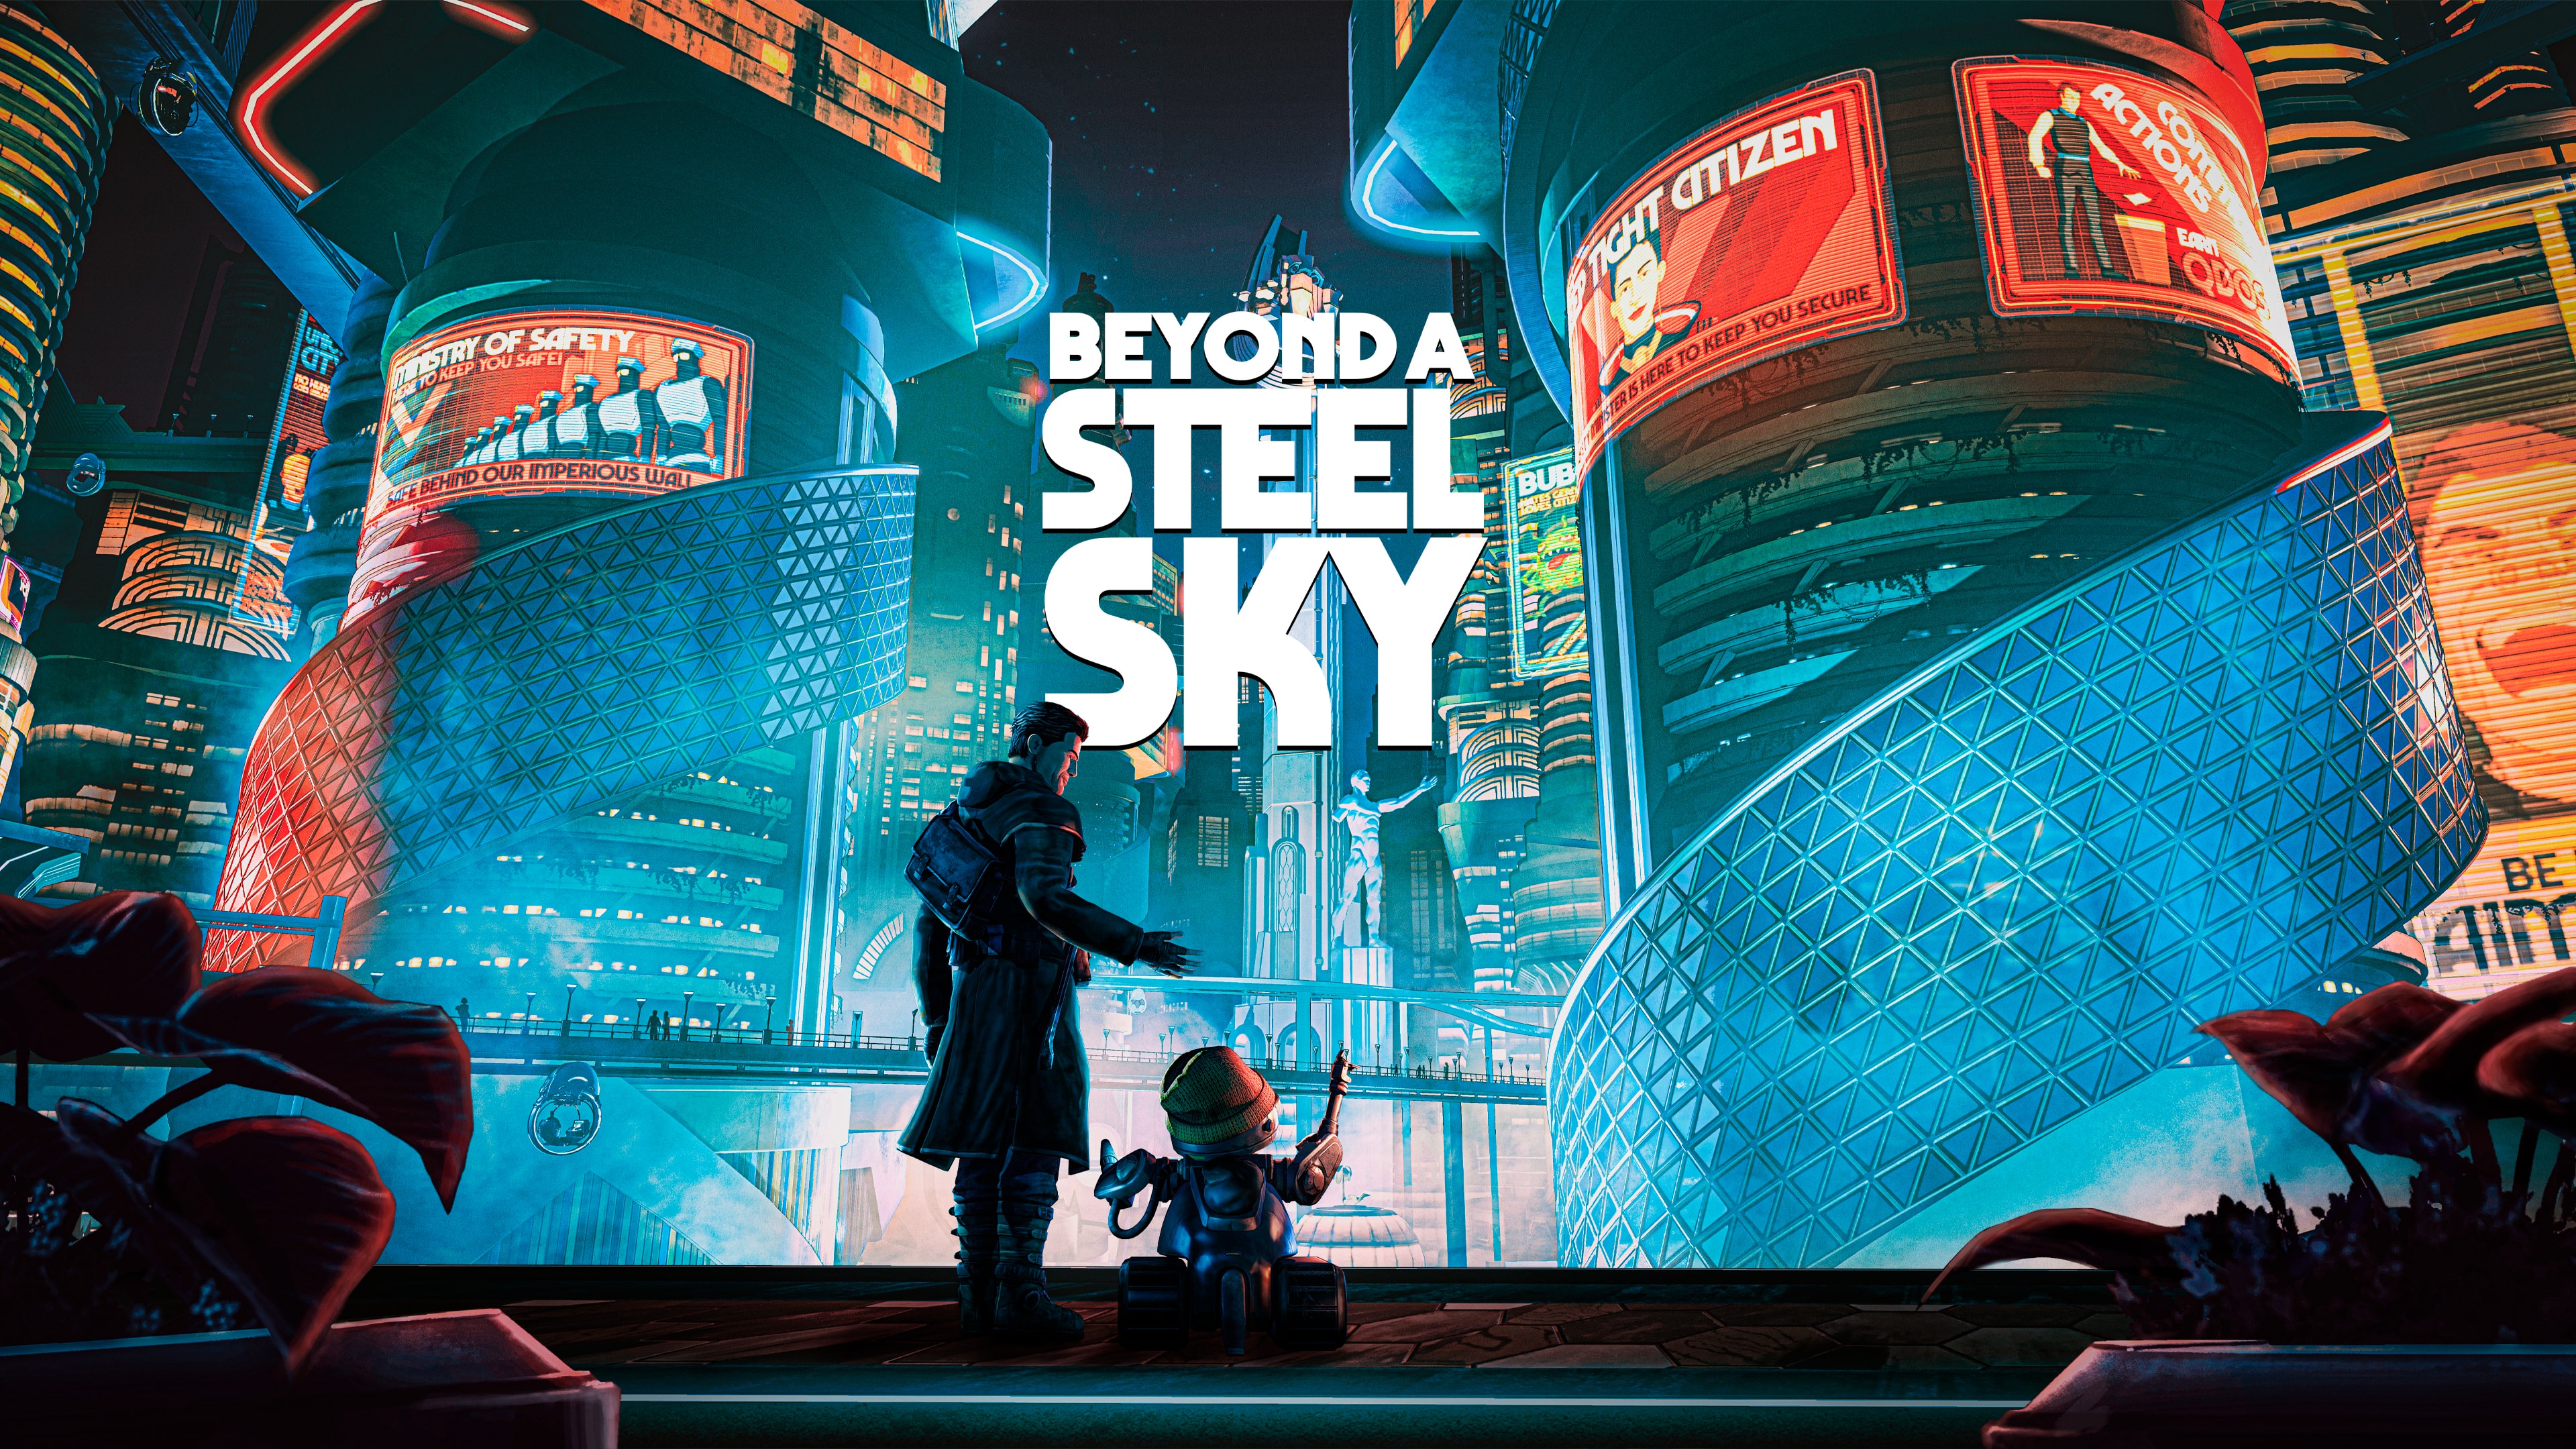 Beyond a Steel Sky (Simplified Chinese, English, Korean, Japanese, Traditional Chinese)